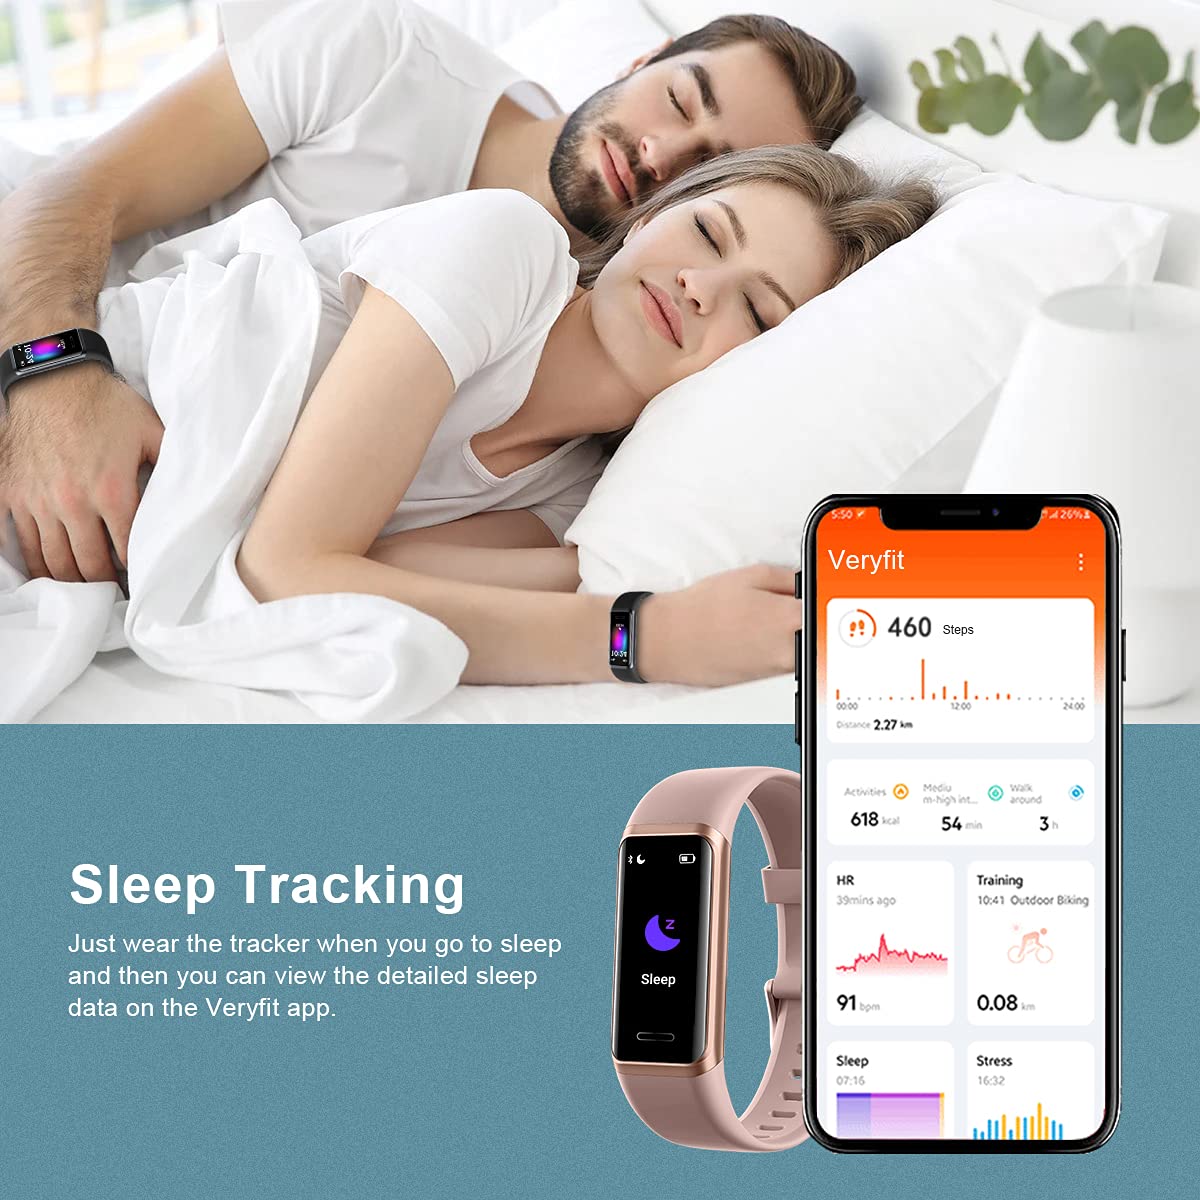 CHEREEKI Fitness Watch, Activity Trackers with Heart Rate Monitor and Sleep Monitor, IP68 Waterproof Smart Watch with Alexa Built-in, Step/Calorie Counter, Pedometer Watch for Women Men (Black)